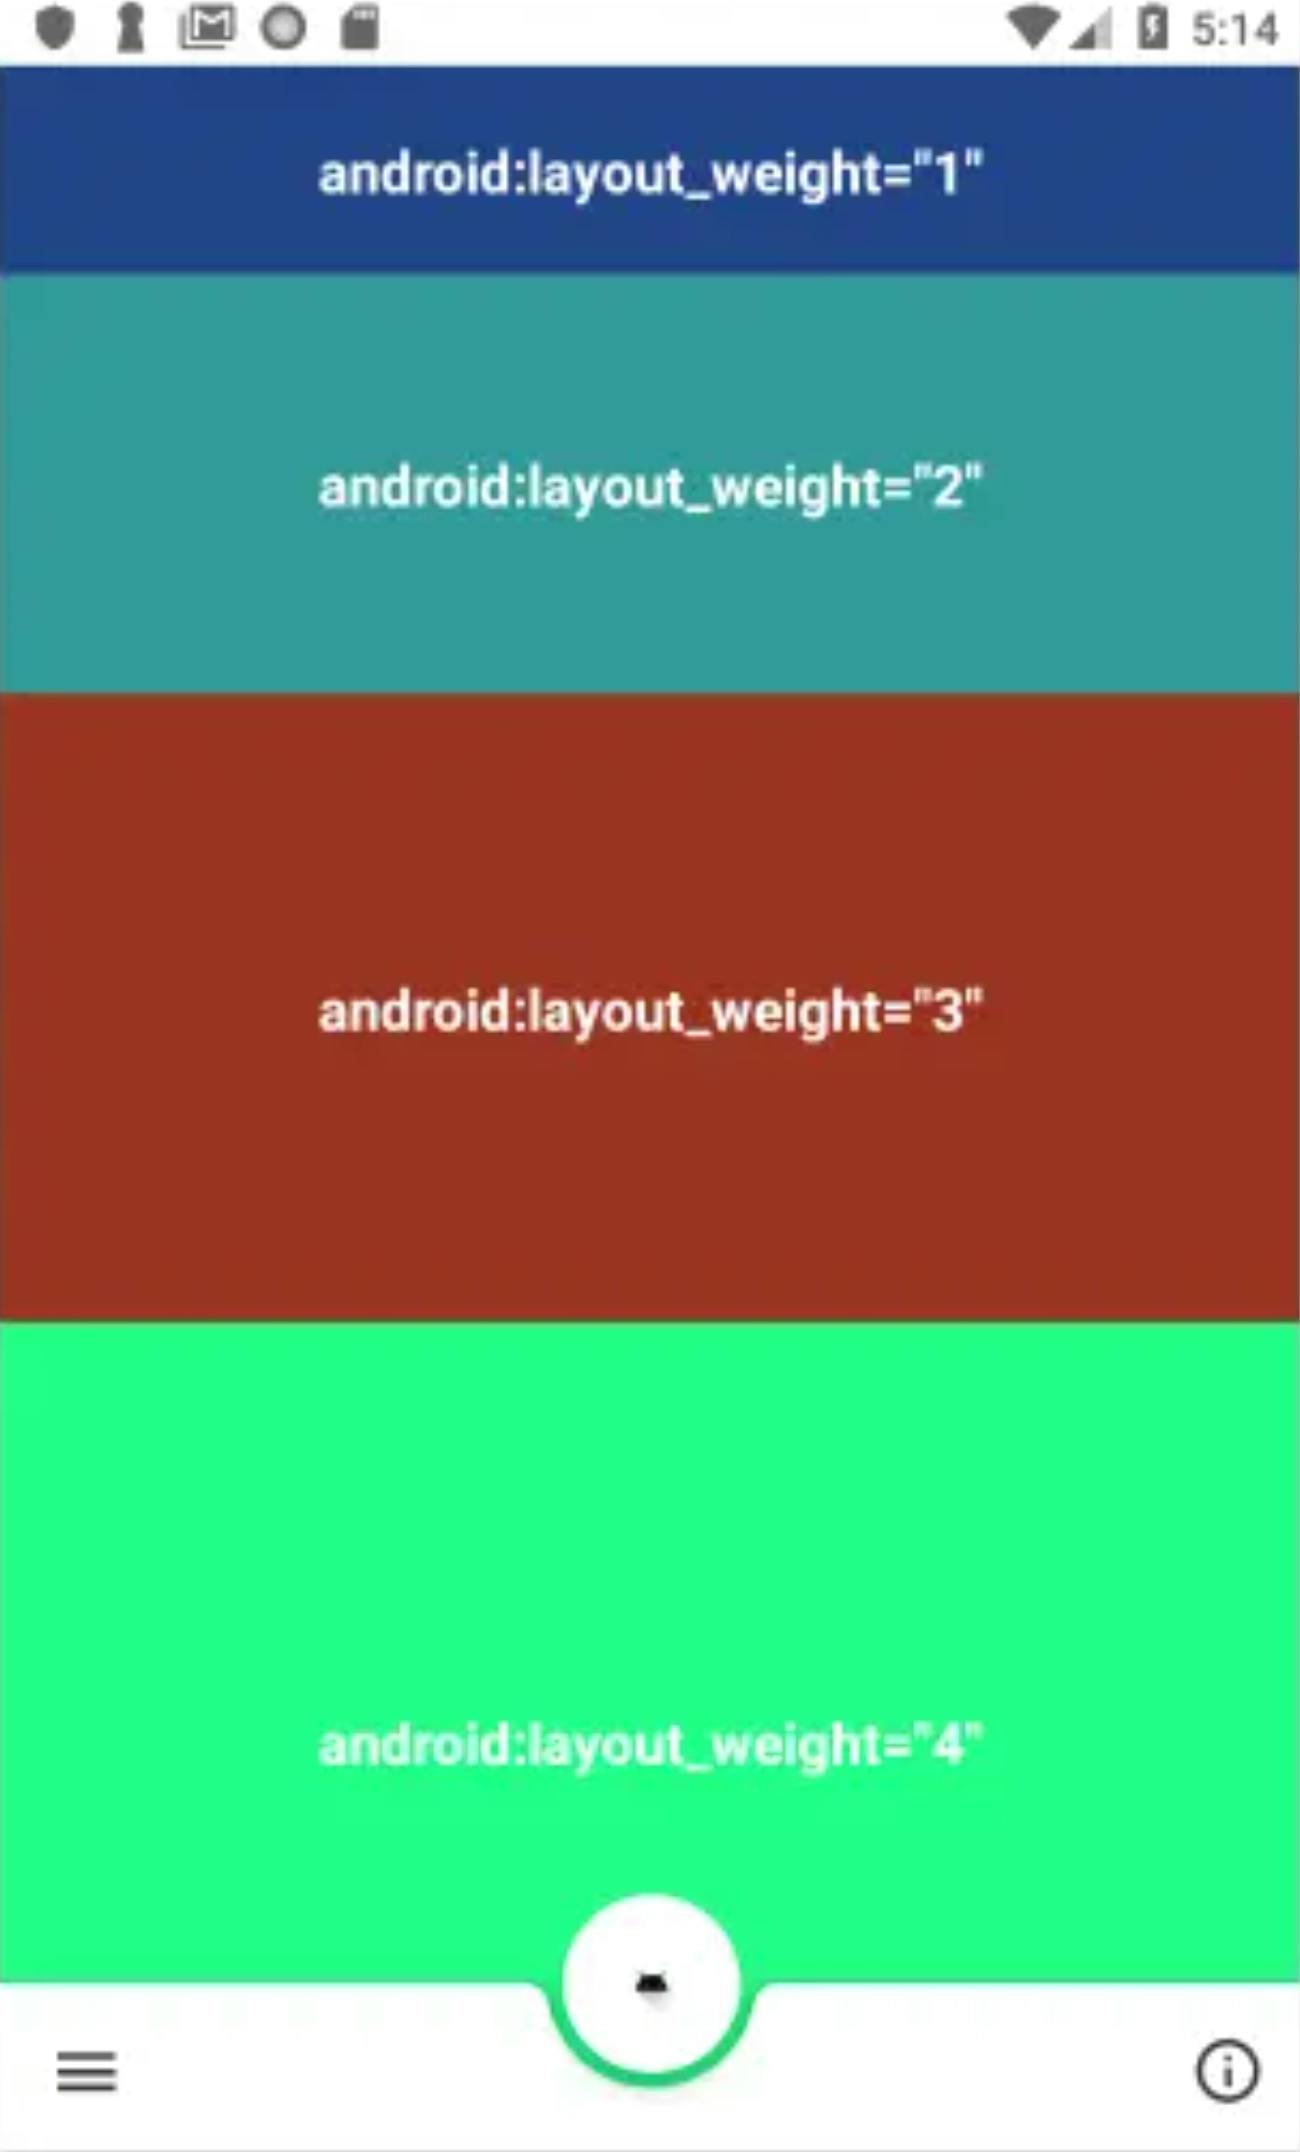 Android study sample - Layout-image-2